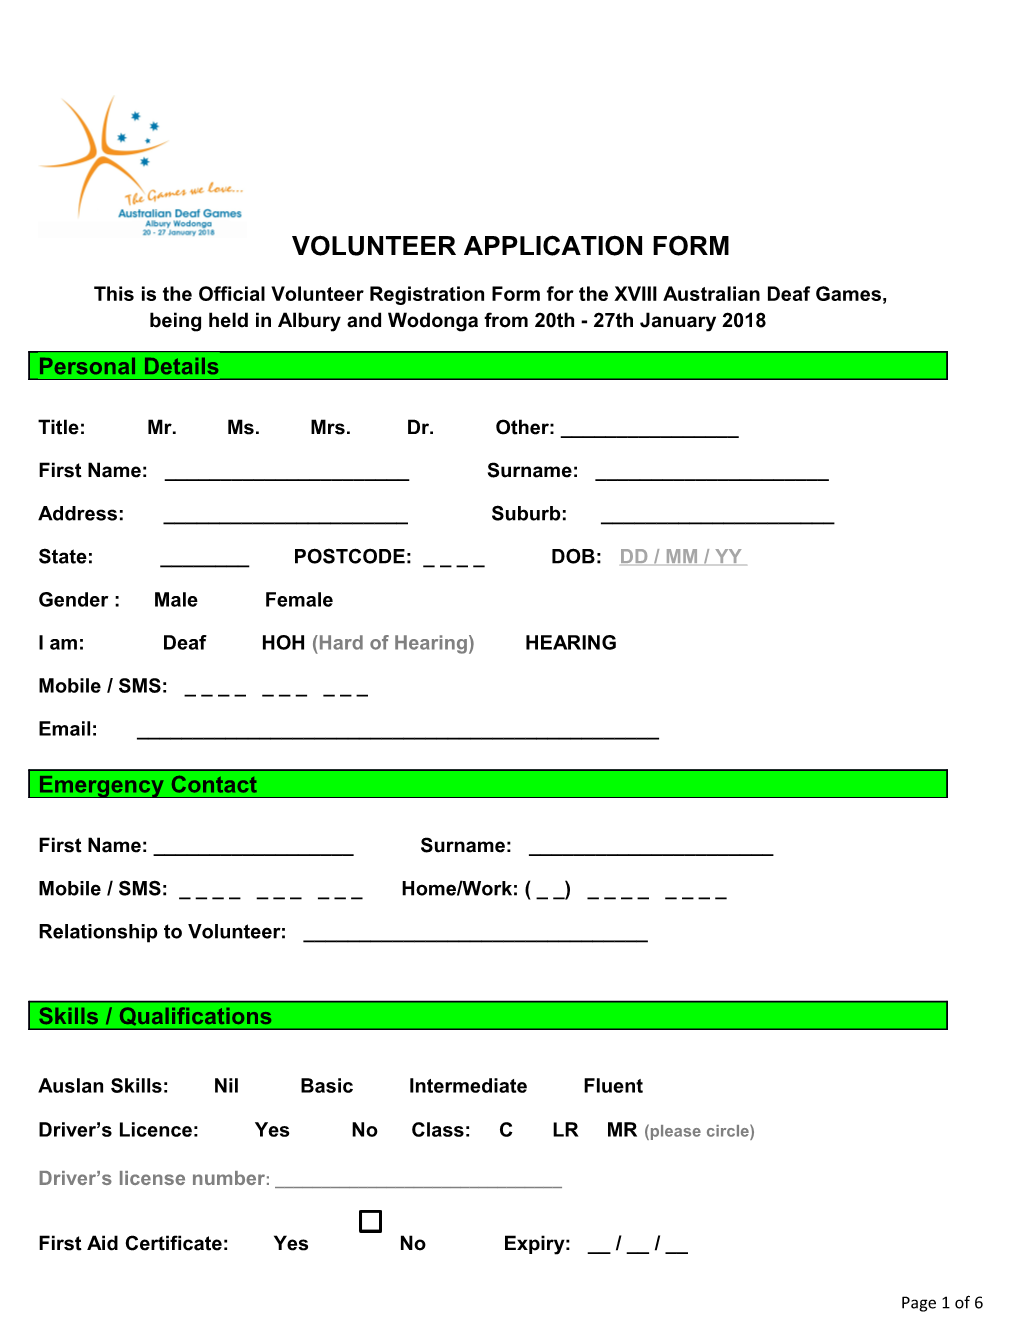 This Is the Official Volunteer Registration Form for the XVIII Australian Deaf Games